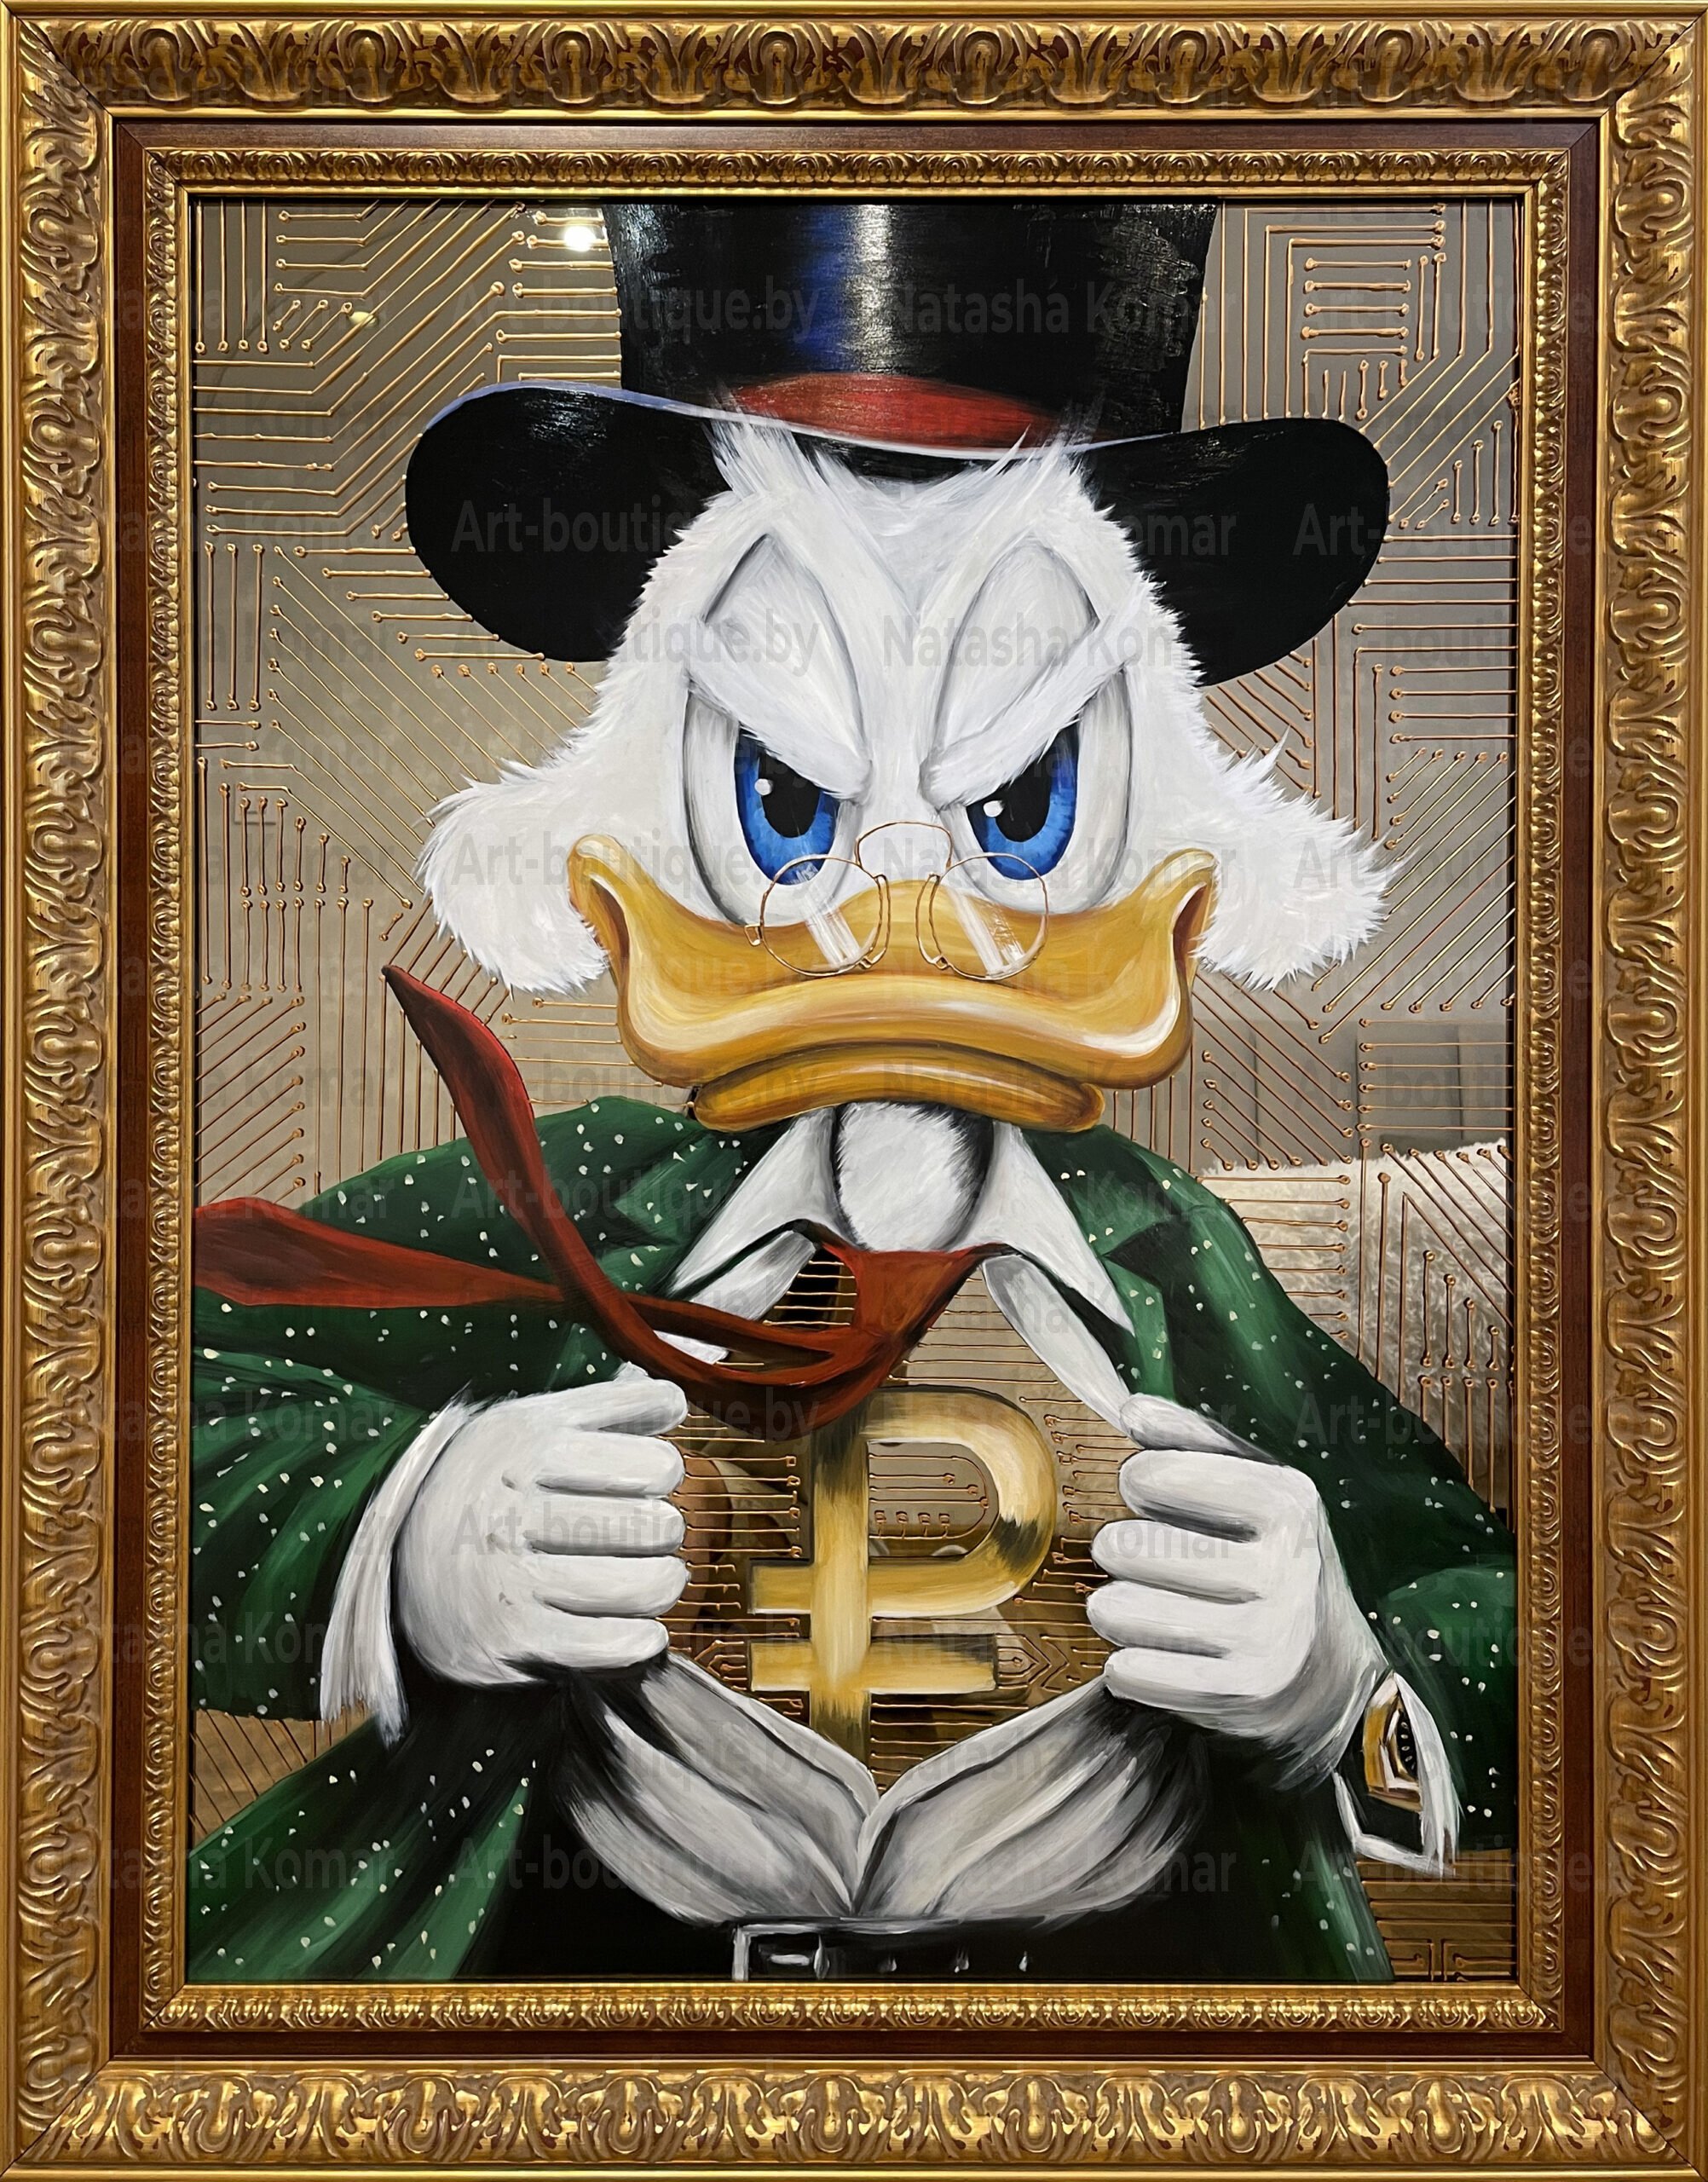 Could This Funko Pop Make You Rich: The Untold Story of Scrooge McDuck Collectibles